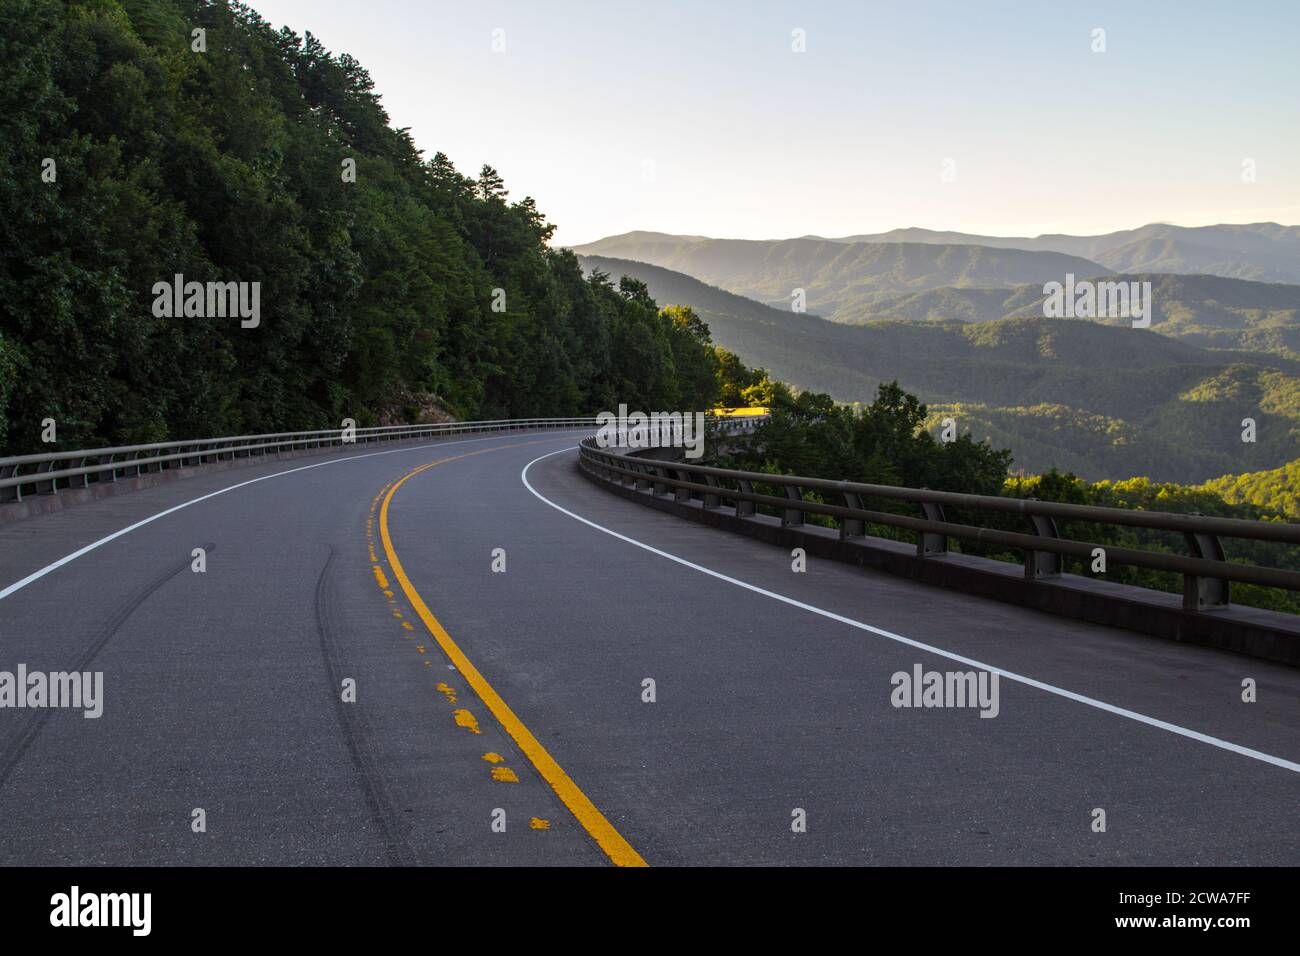 Driving The Foothills Parkway. Winding mountain road along the Great Smoky Mountains Foothills Parkway in Wears Valley, Tennessee, USA. Stock Photo